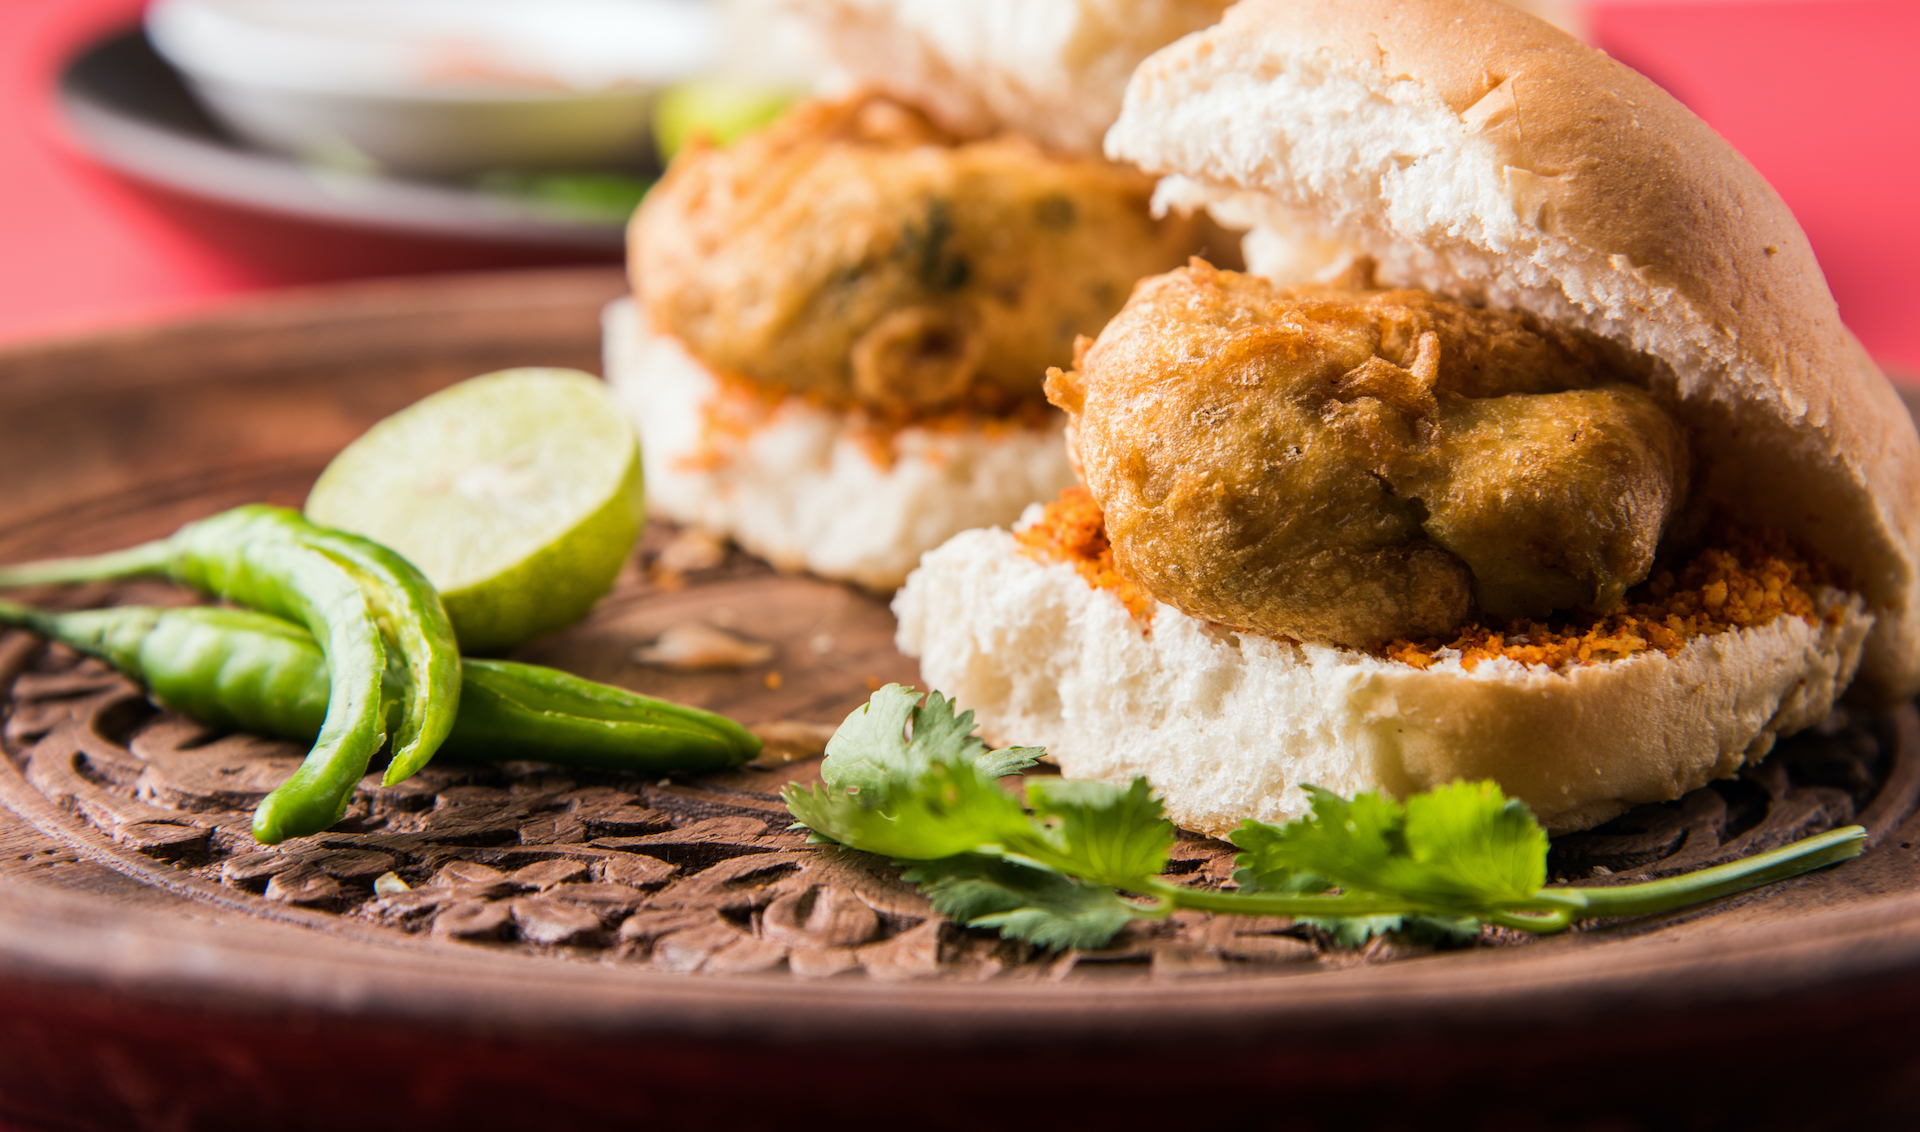 Vada Pav OR Wada Pao is Indian OR Desi Burger, is a roadside fast food dish from Maharashtra